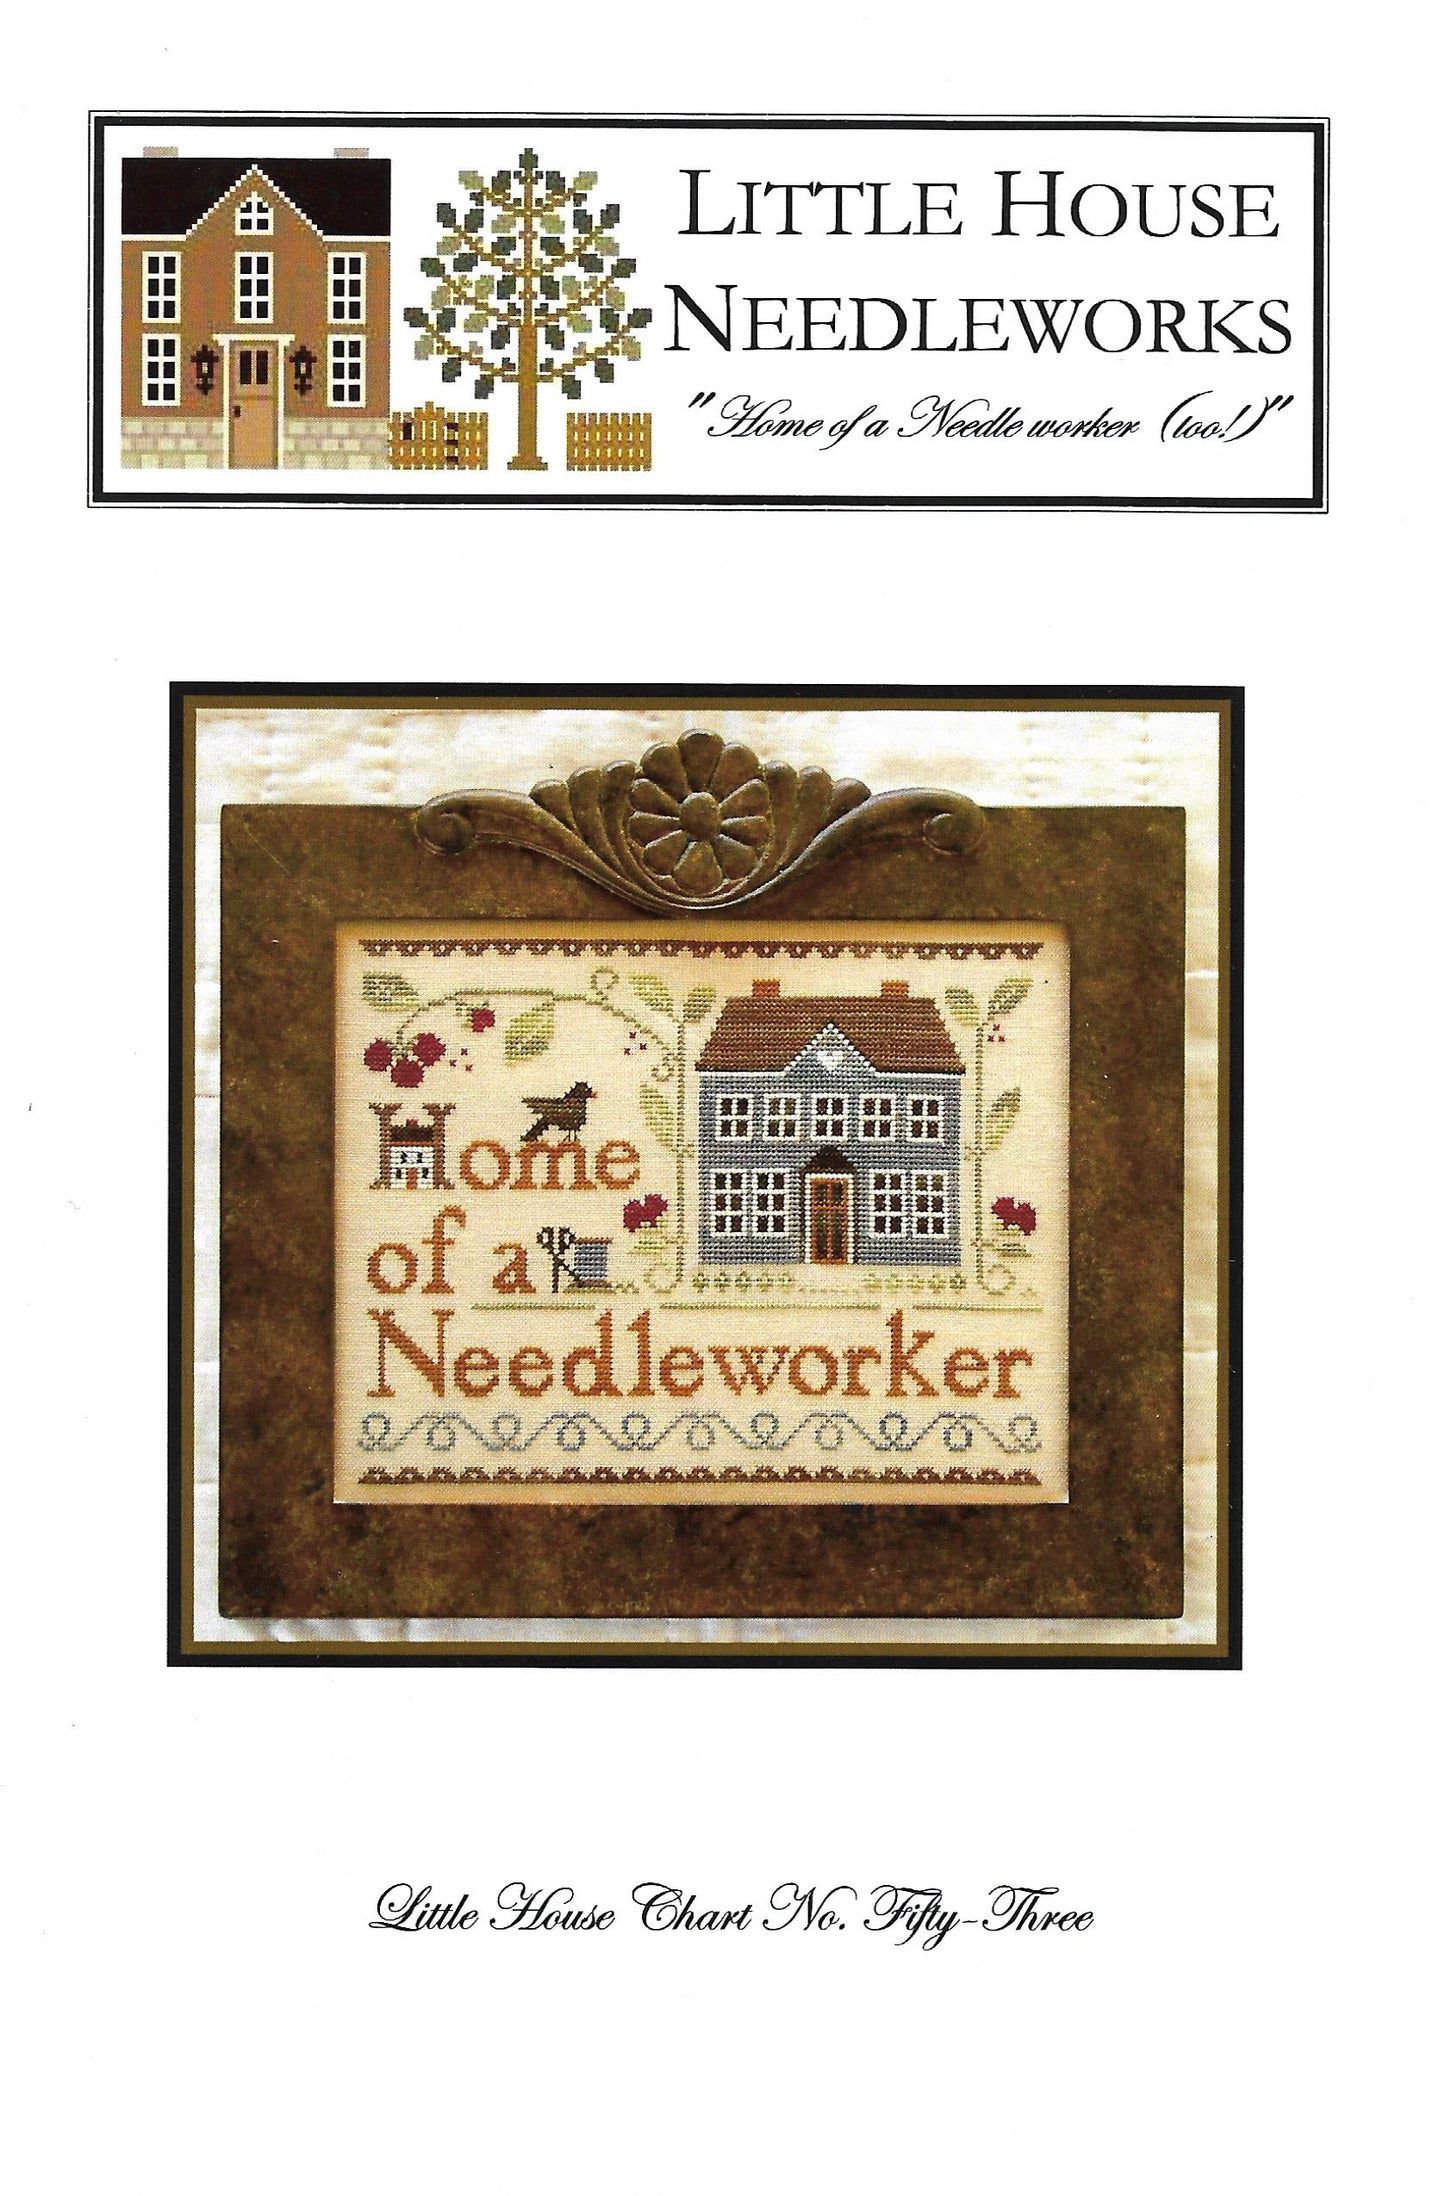 Little House Needleworks - Home of a Needleworker Too!